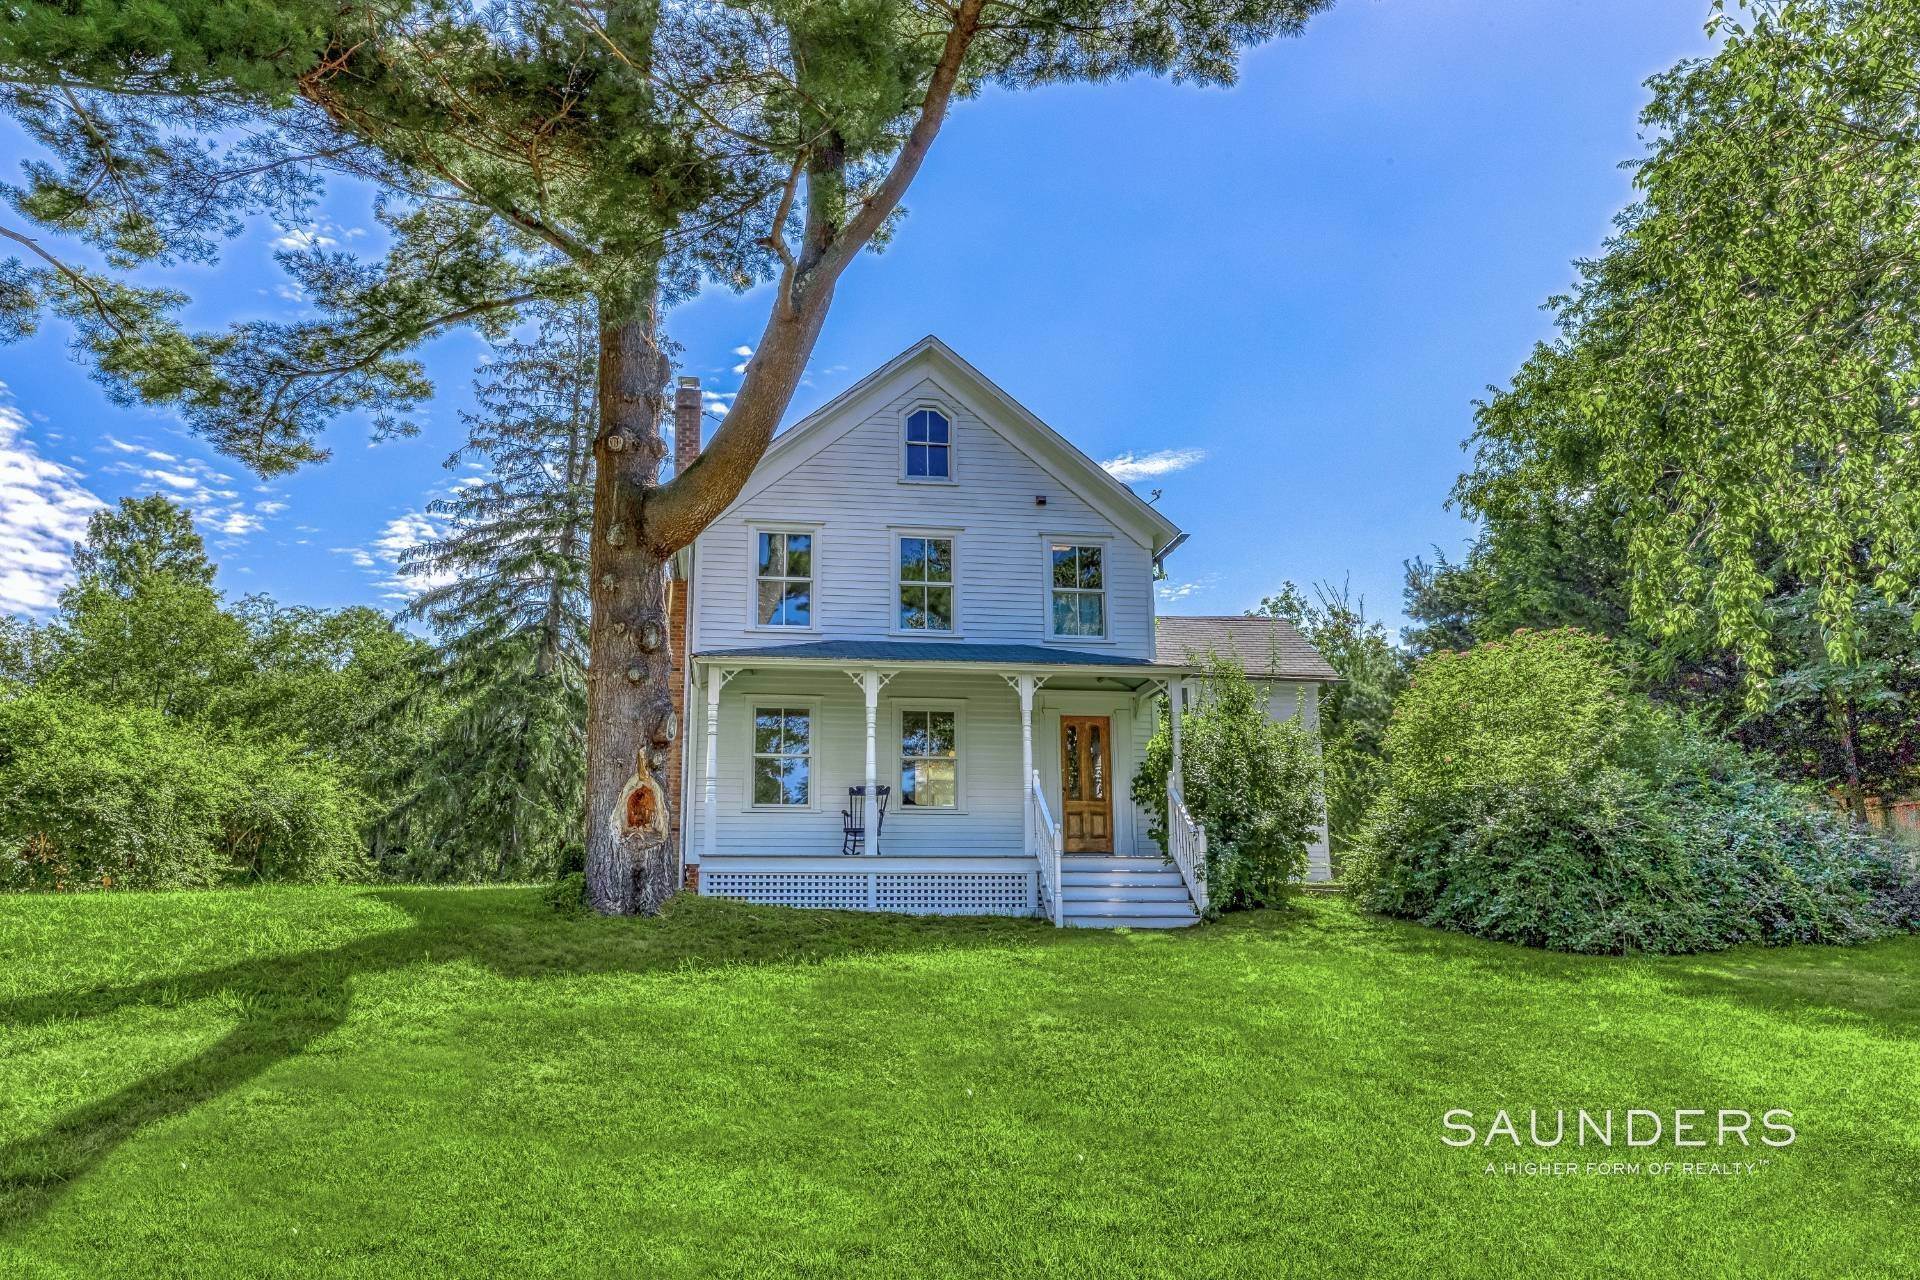 45. Single Family Homes for Sale at Shelter Island Restored 1900 Farmhouse With Barn 9 Sunshine Road, Shelter Island, NY 11964